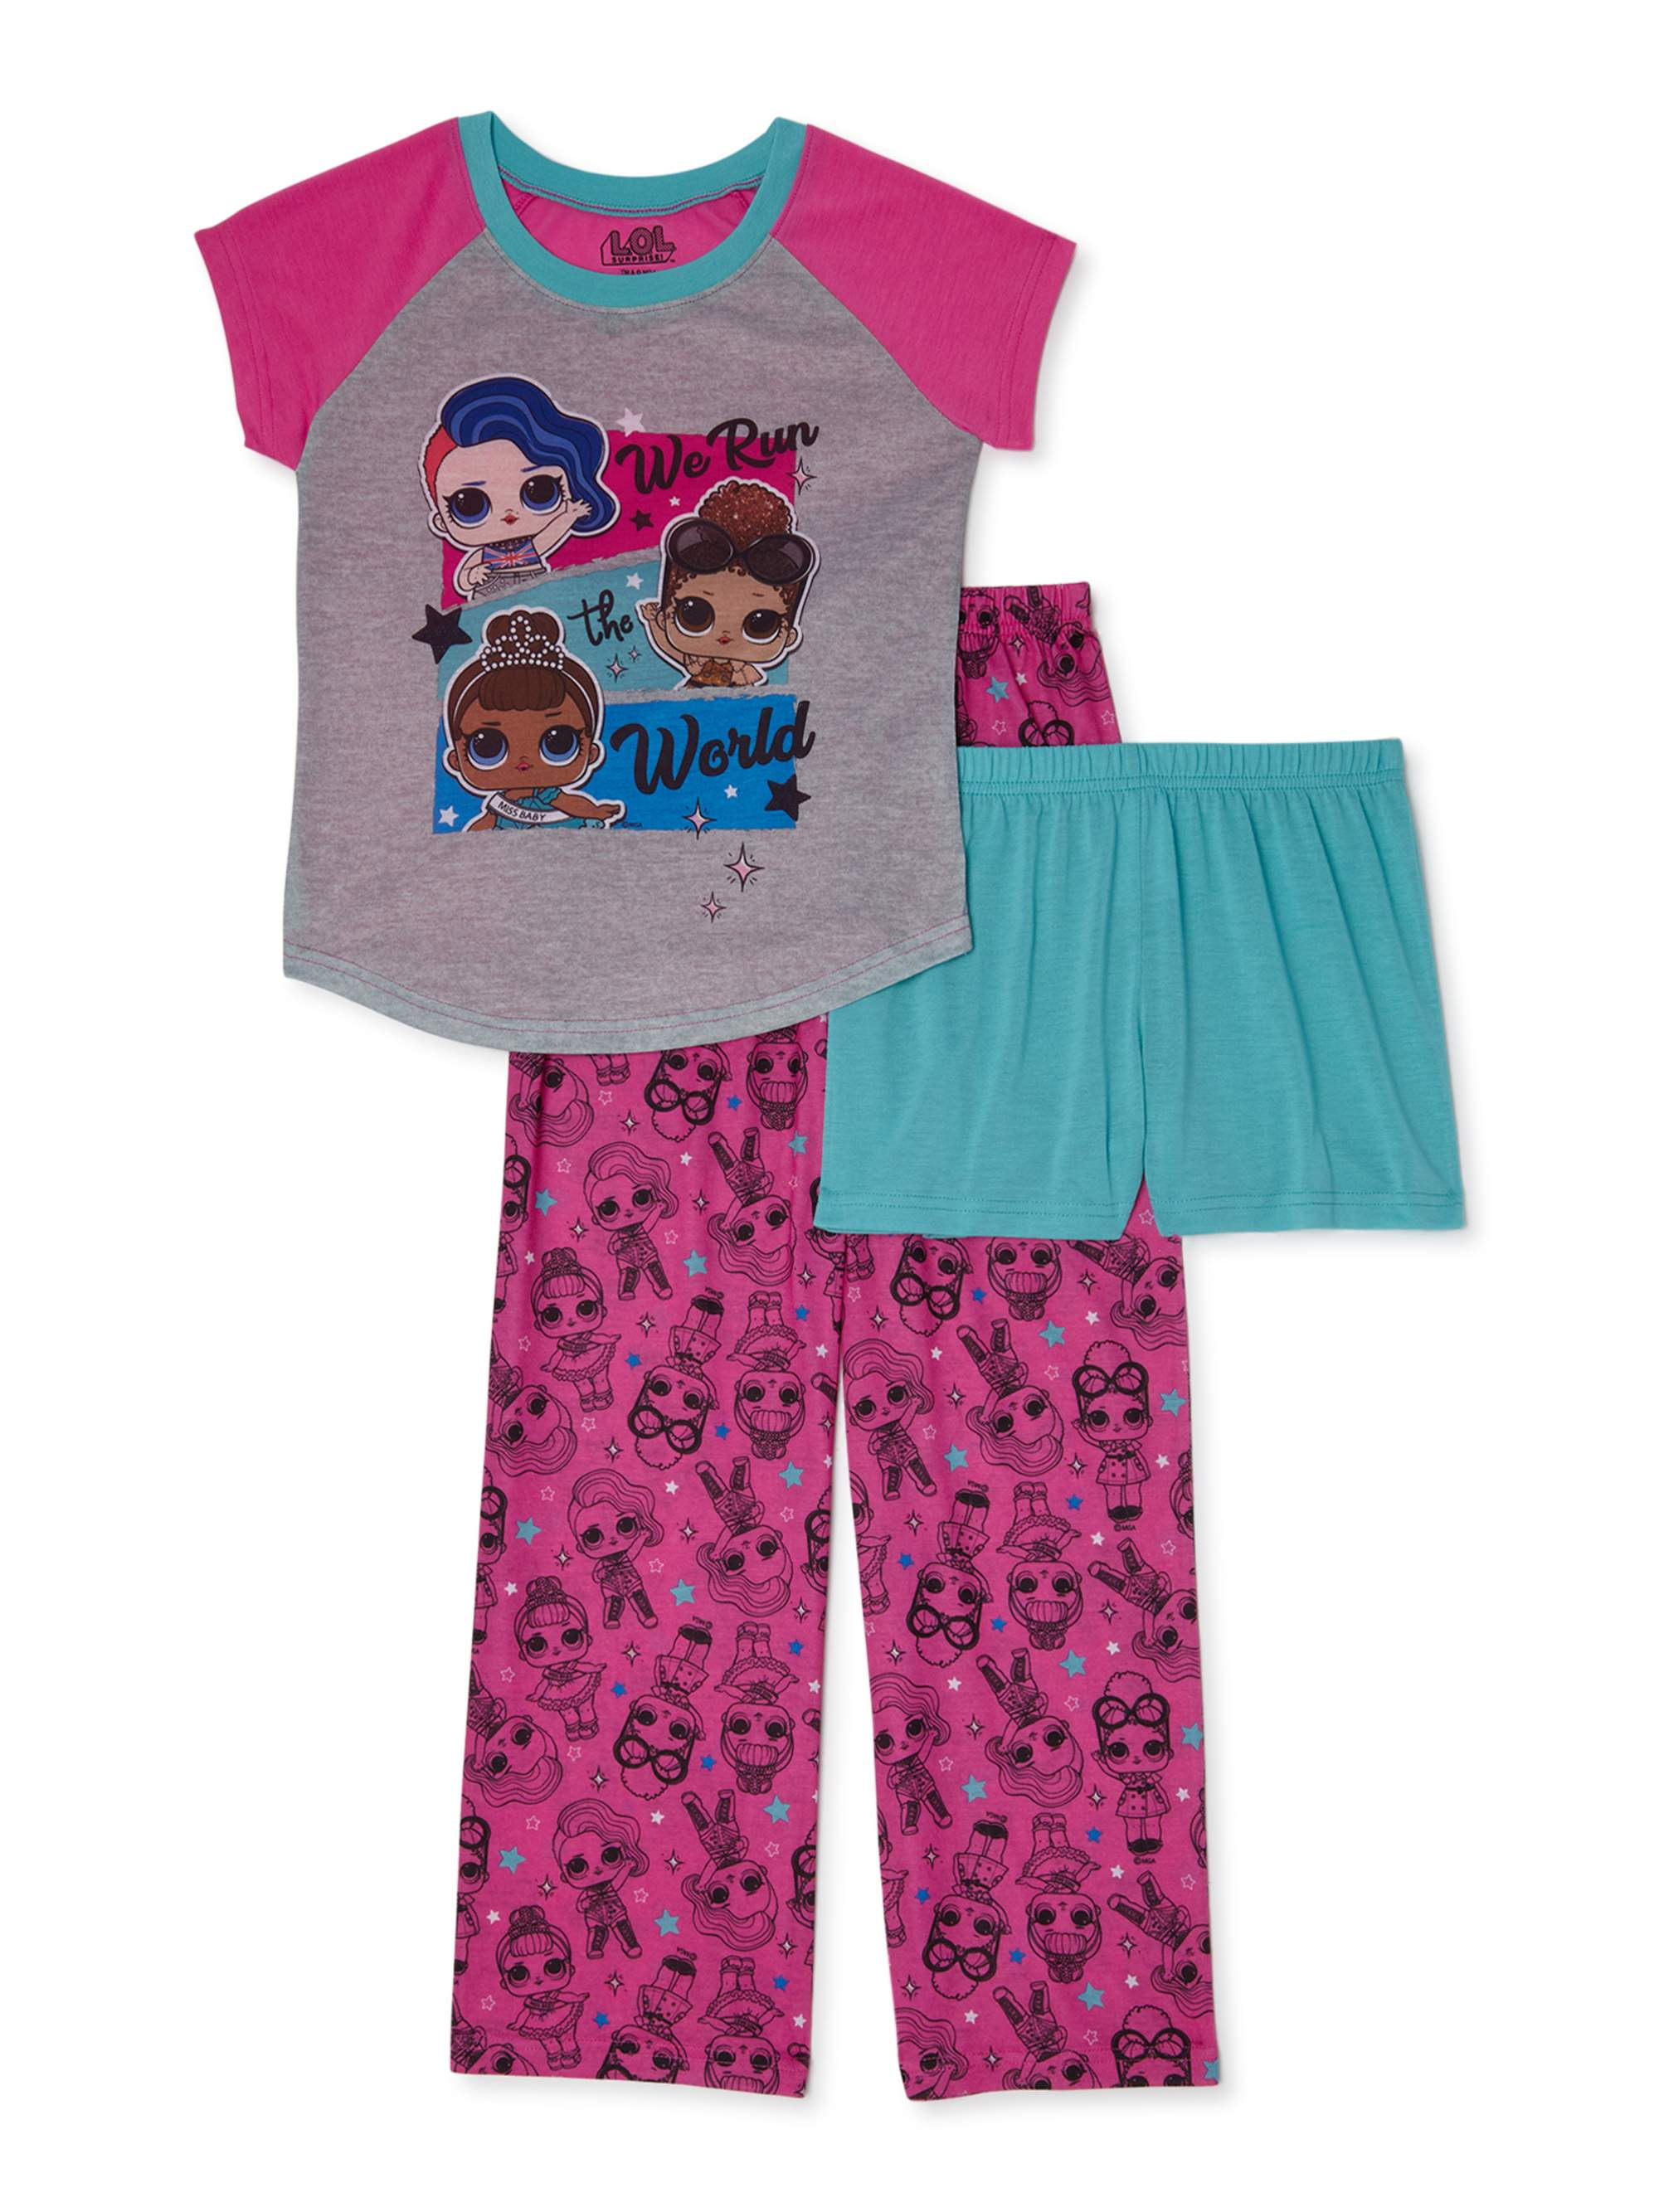 LOL Surprise Short Sleeve Pyjamas for Girls 4-6 Years Only 